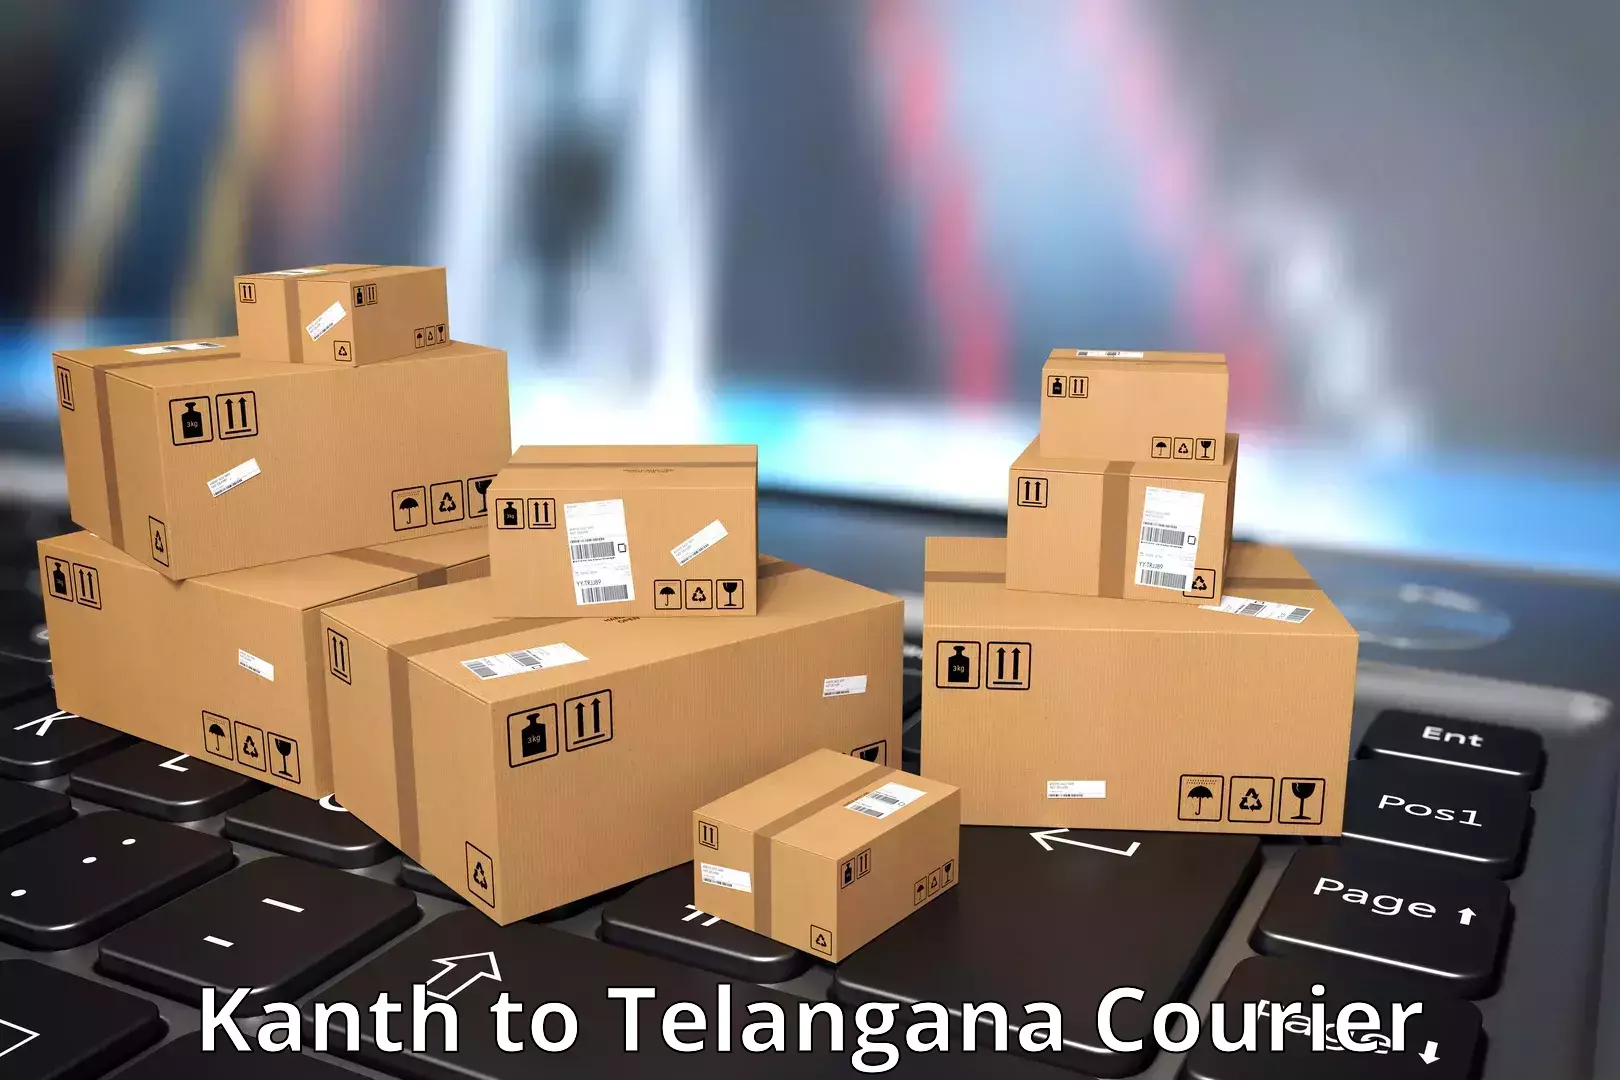 Round-the-clock parcel delivery Kanth to Hyderabad